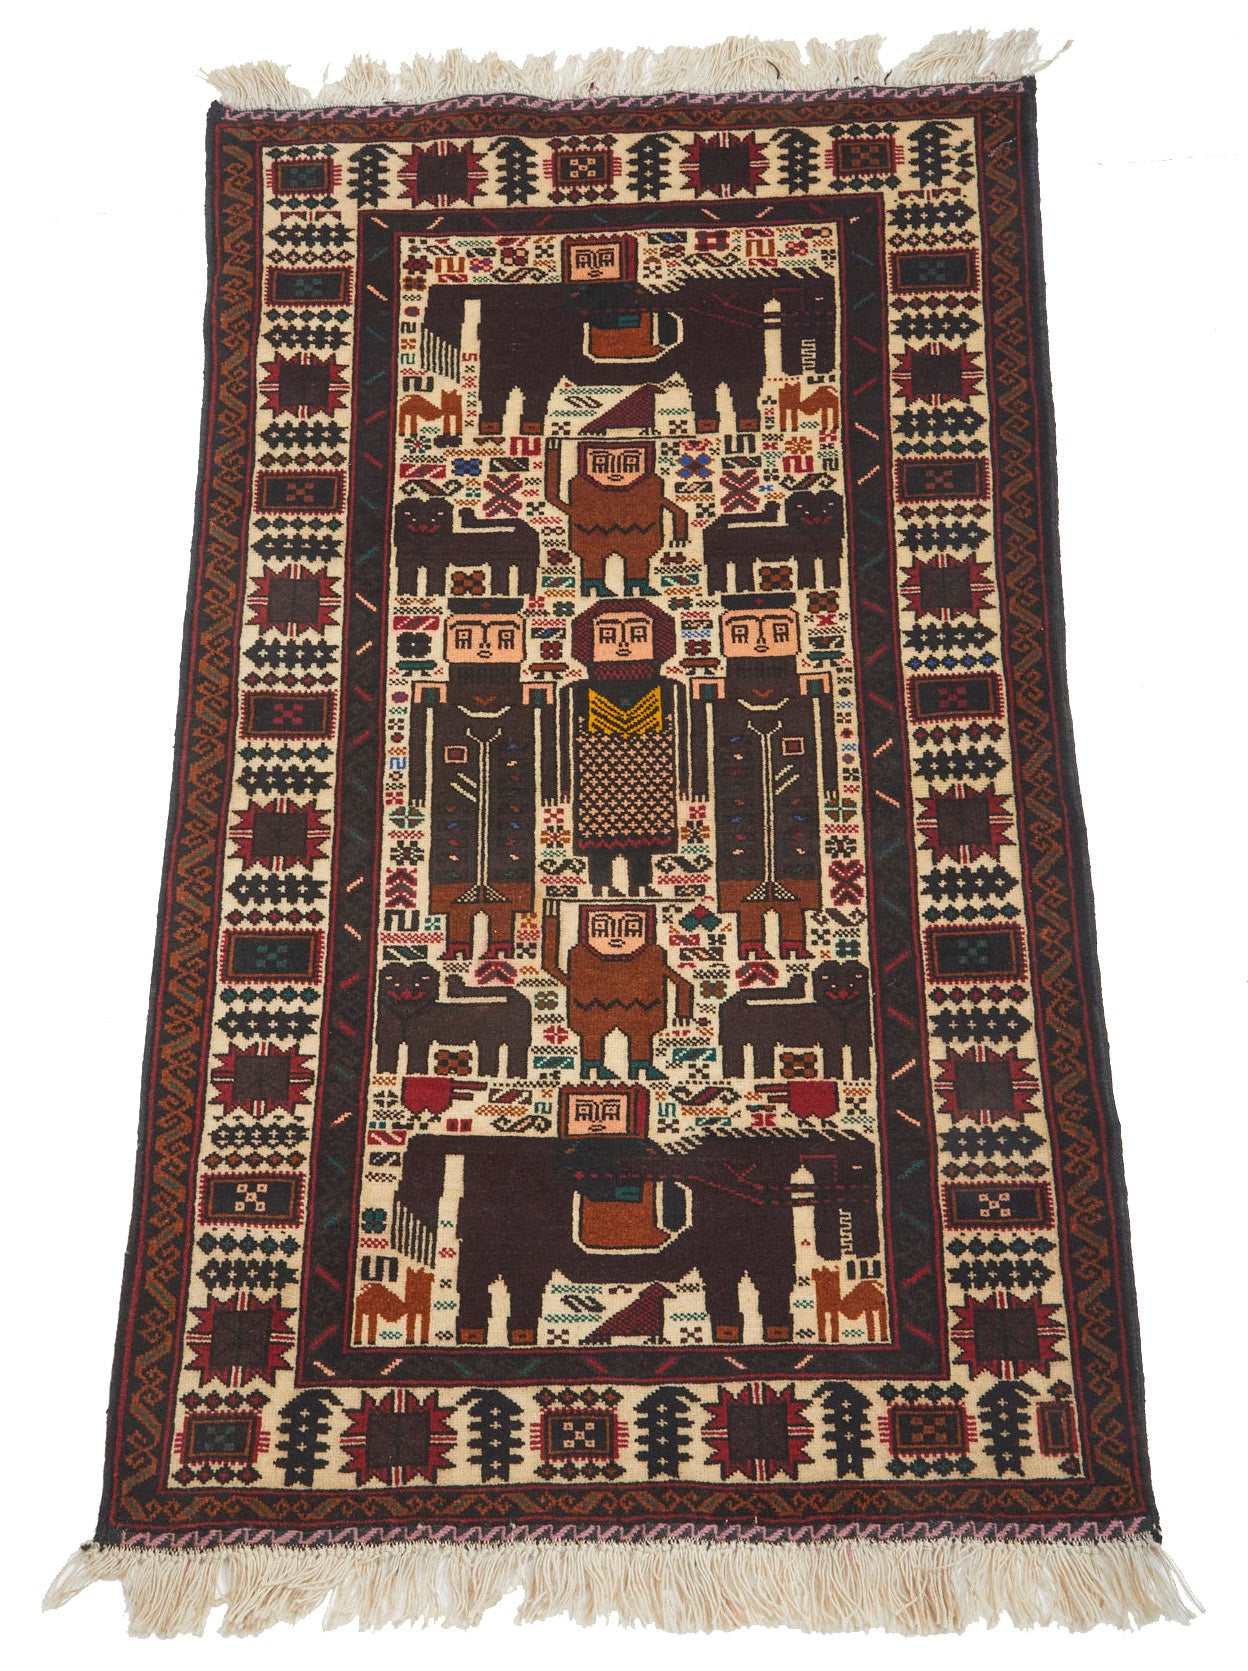 Hand woven Afghan Pictorial Rug depicting horses and people in natural brown and cream tones - Available from King Kennedy Rugs Los Angeles